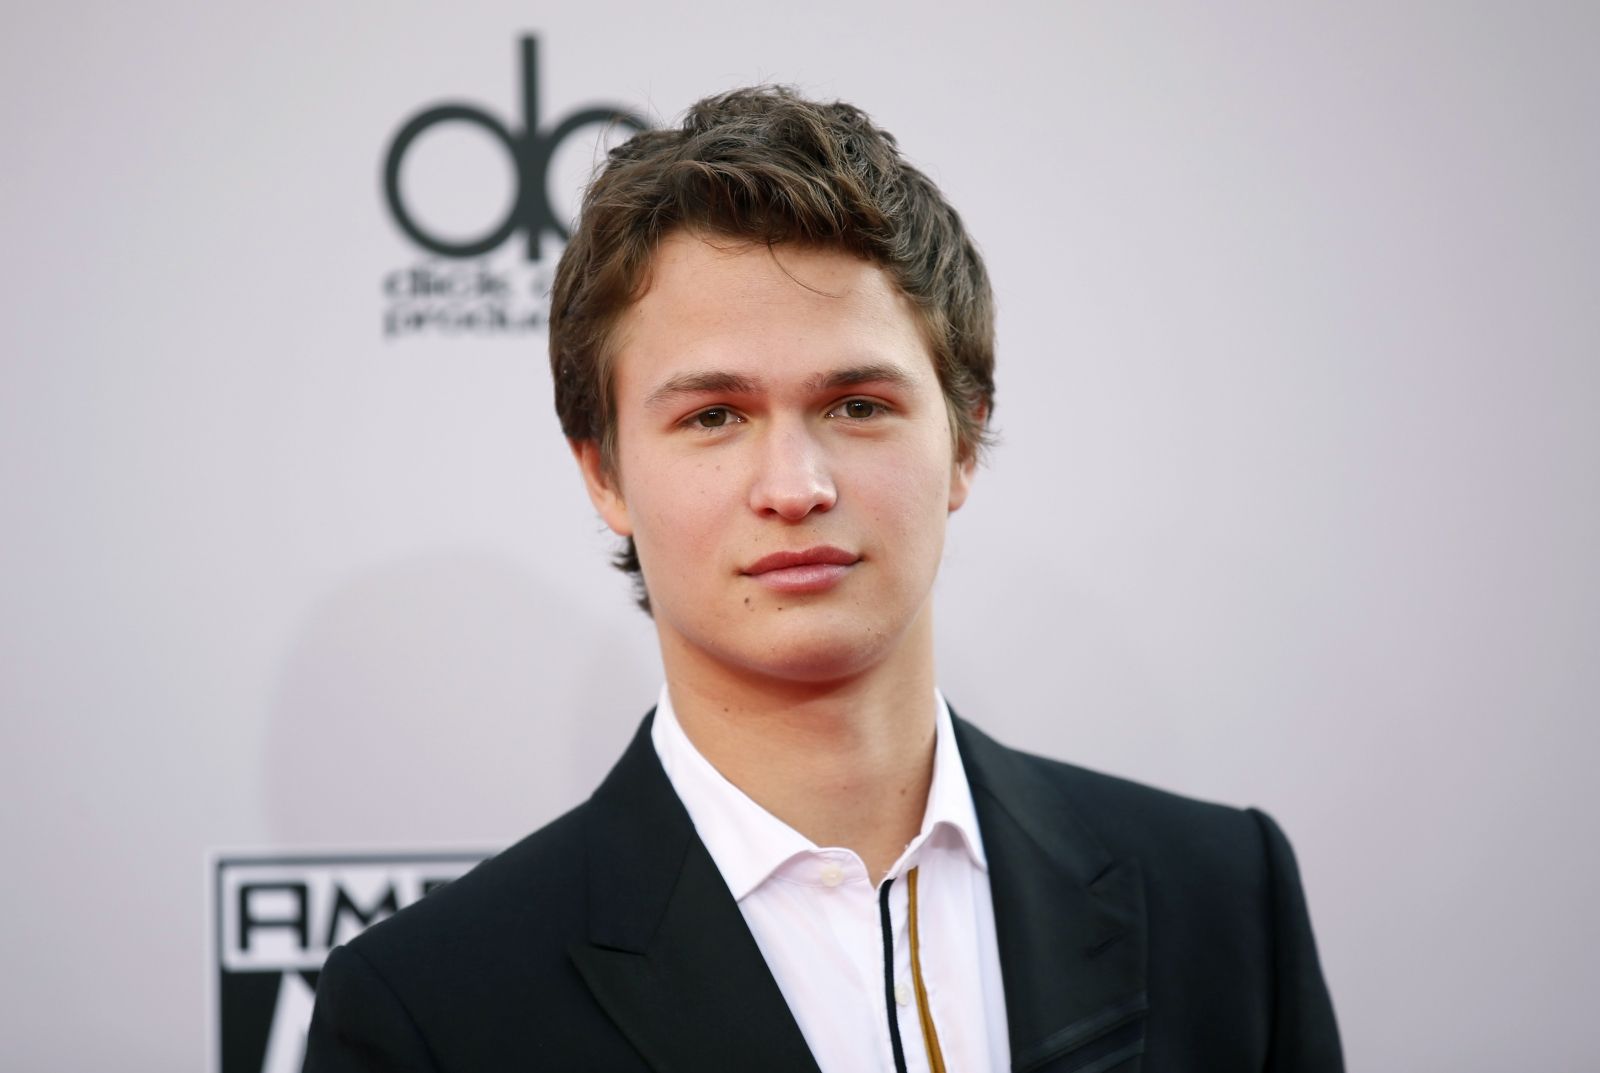 I actually did a lot of prep for this film, Says Ansel Elgort On Working In Baby Driver